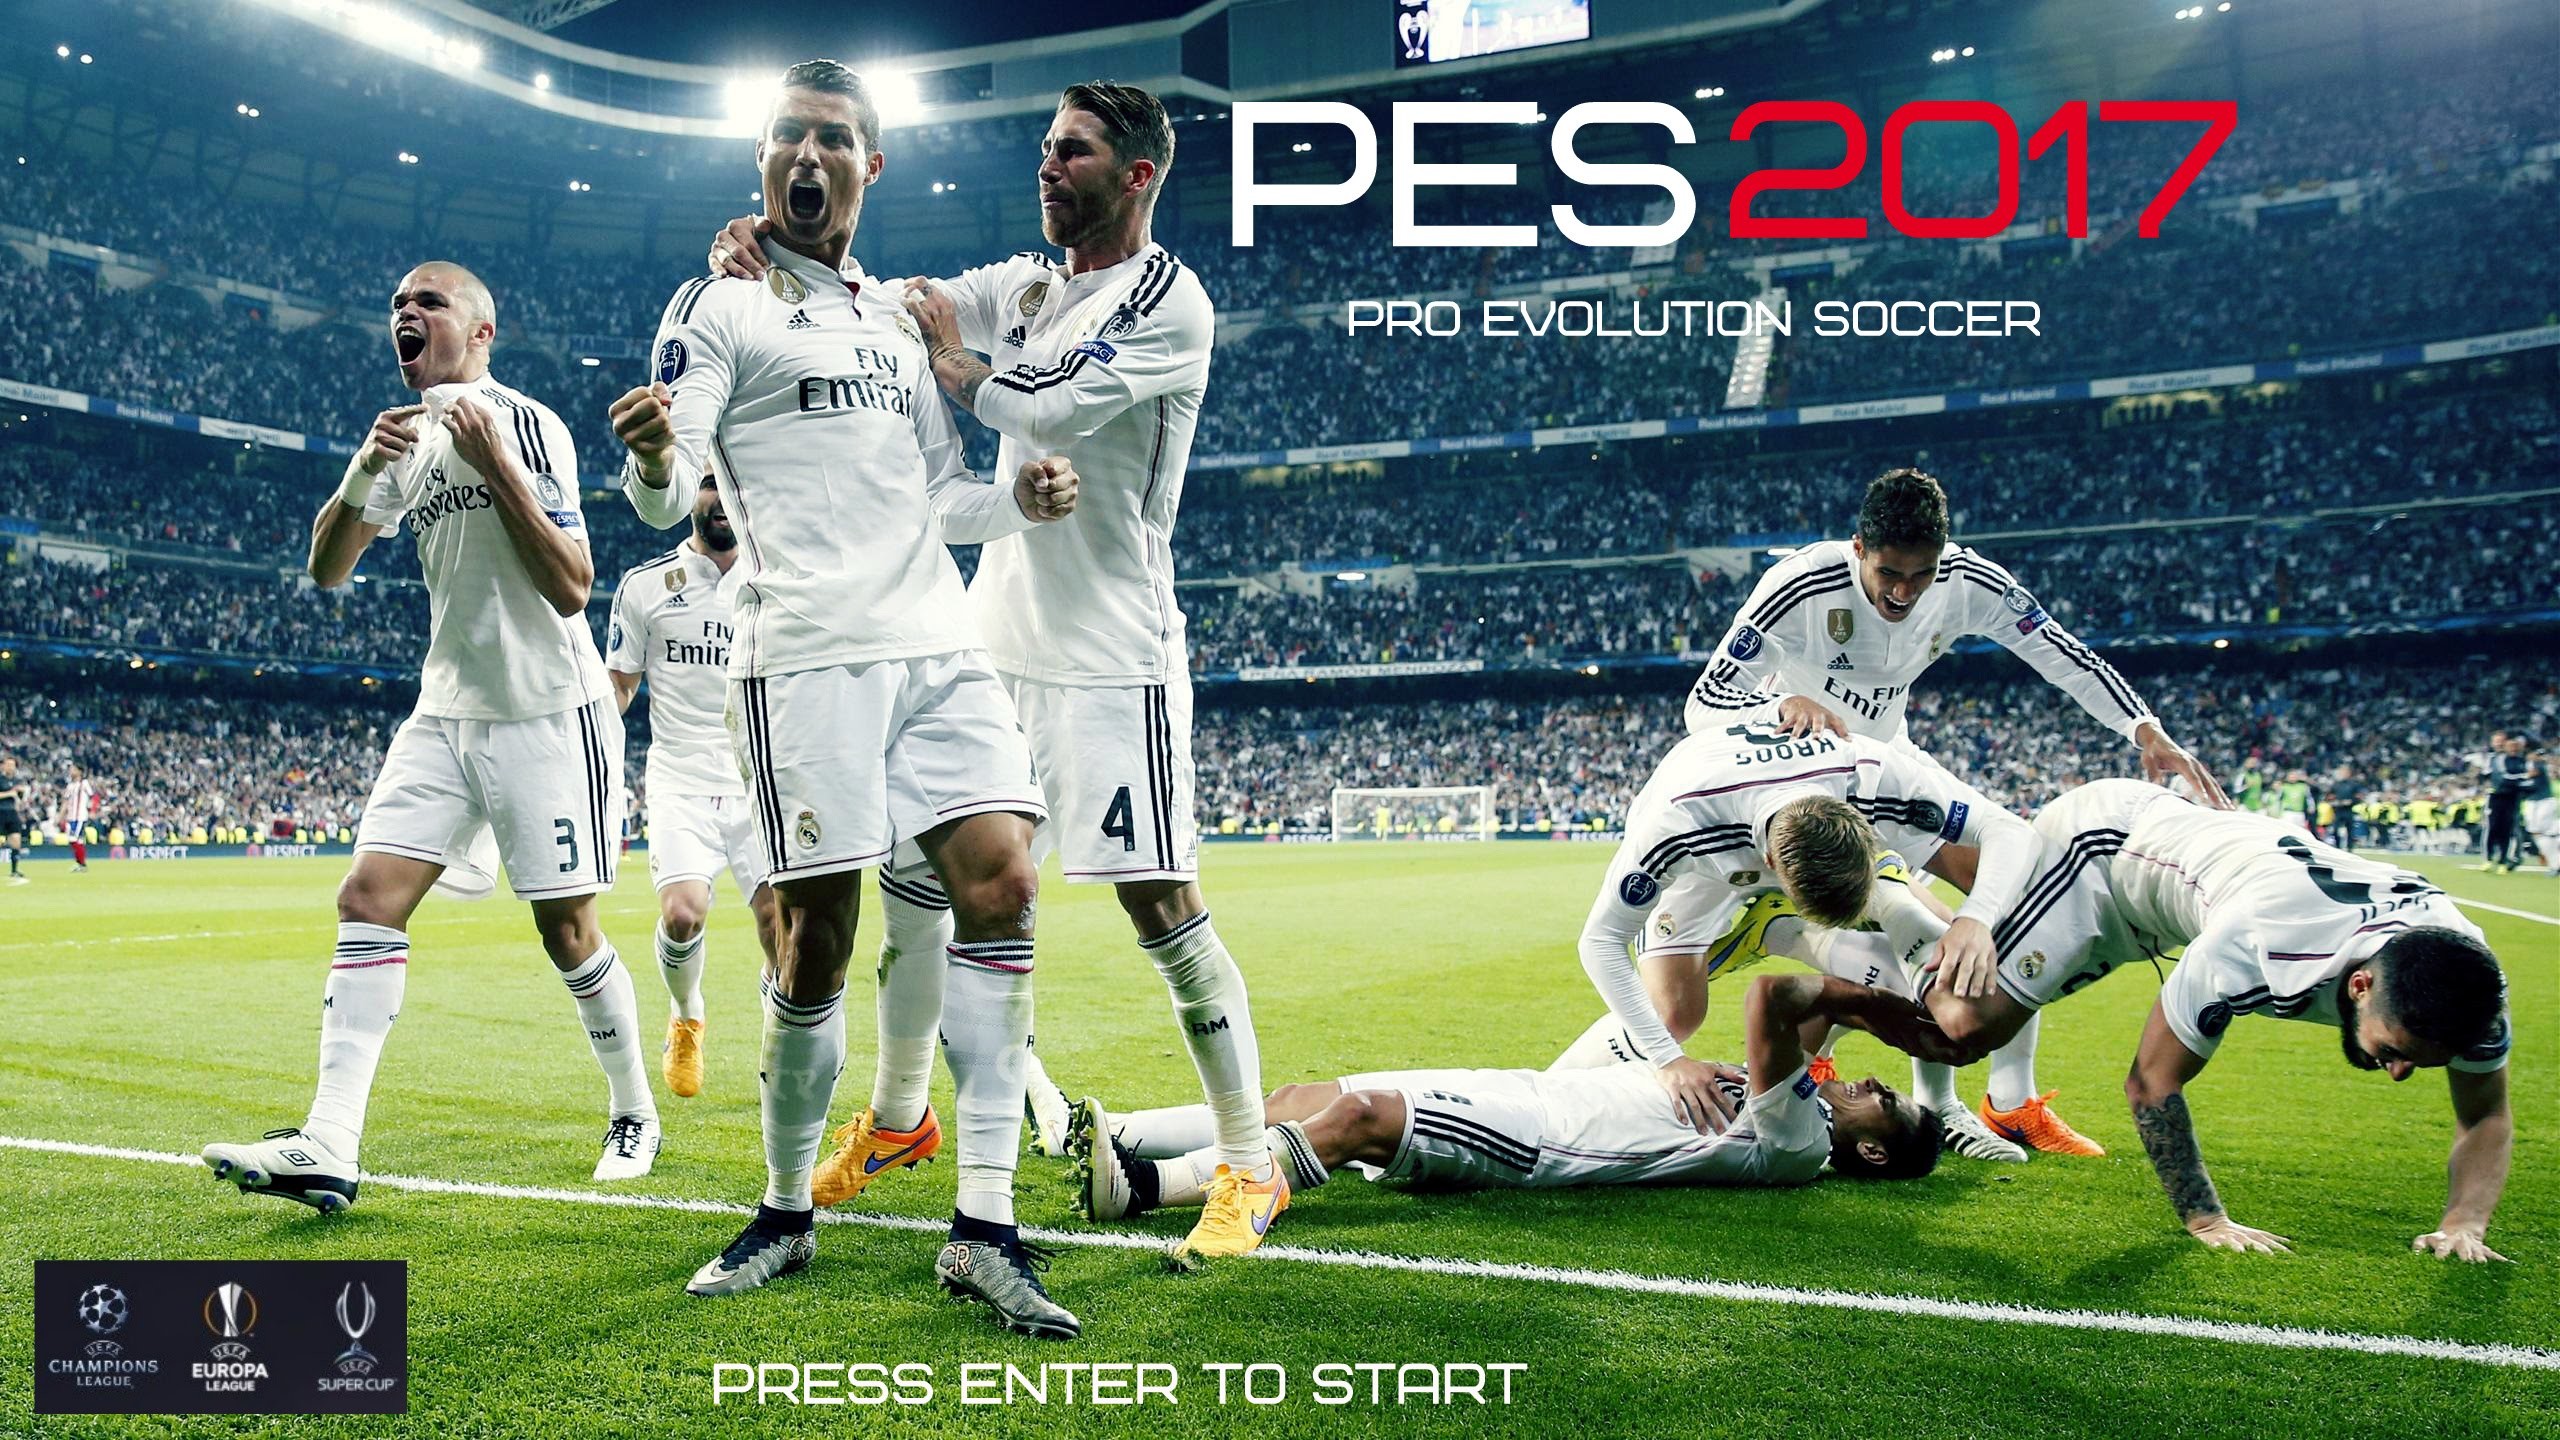 PES 2018 Real first official gameplay and trailer. Football is the best game in the planet